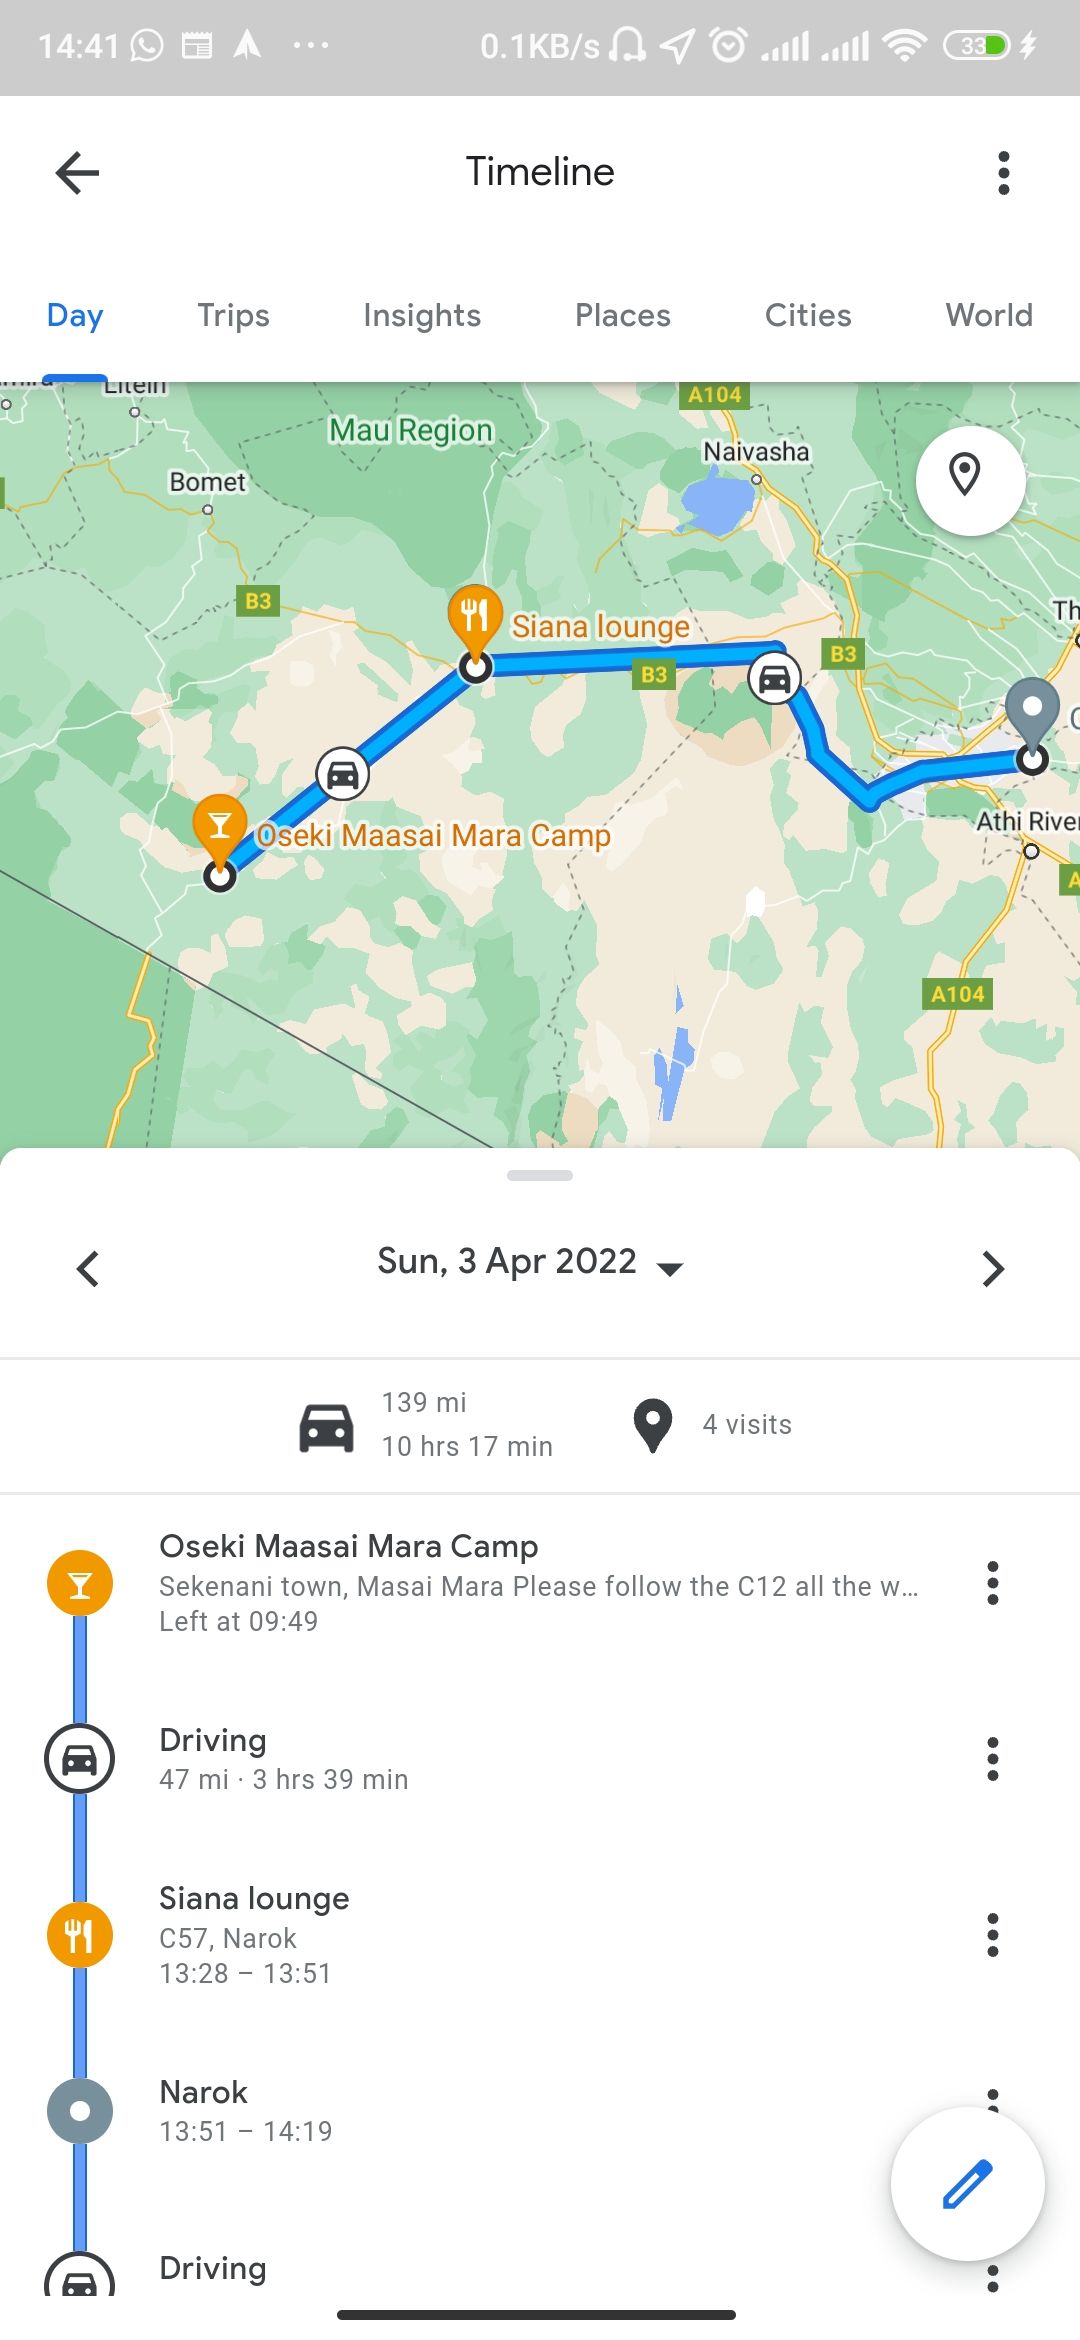 A day's location timeline in Google Maps